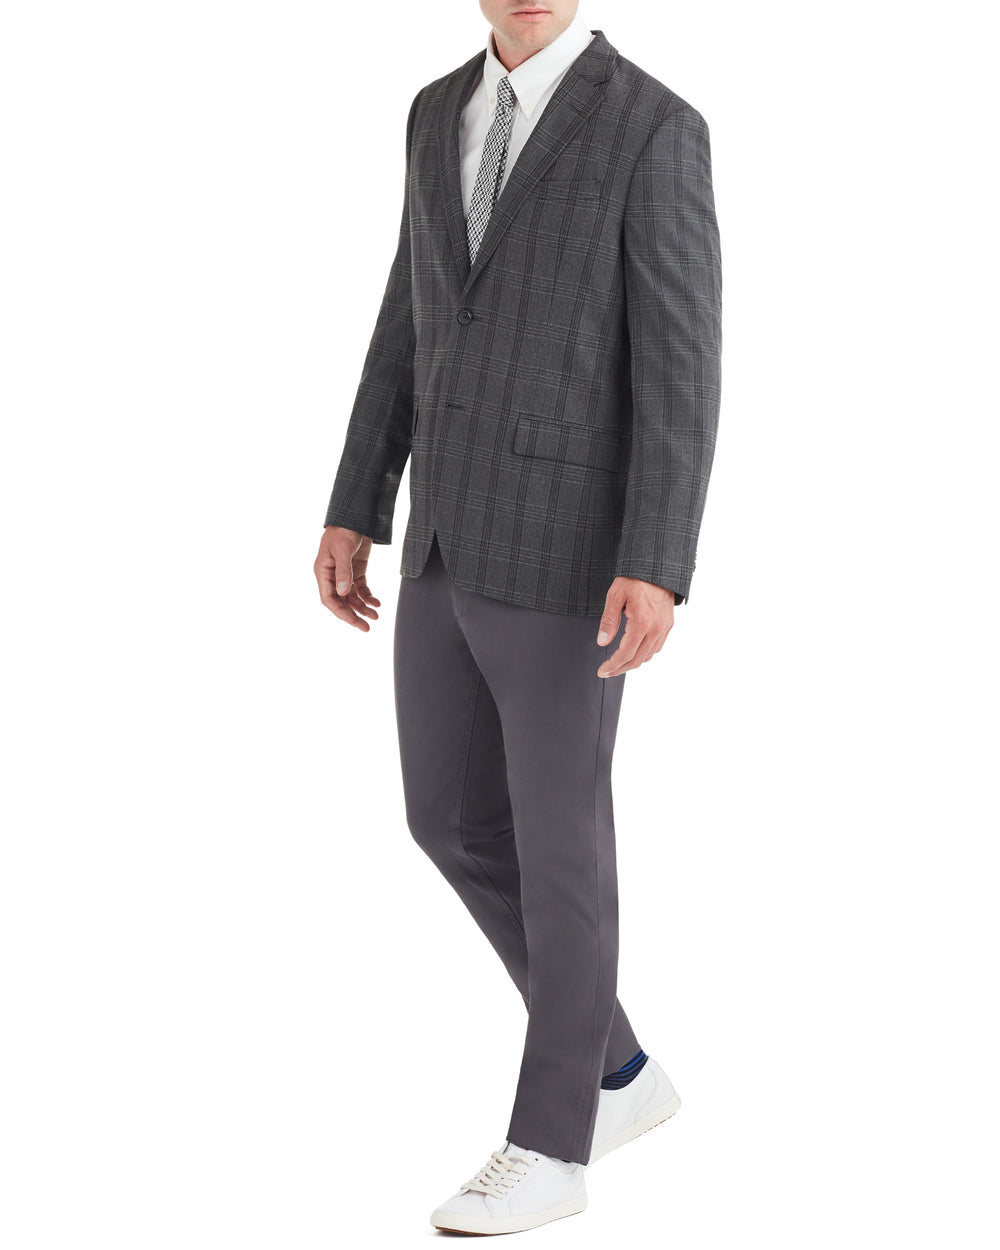 Crown Check Sportcoat Jacket - Charcoal